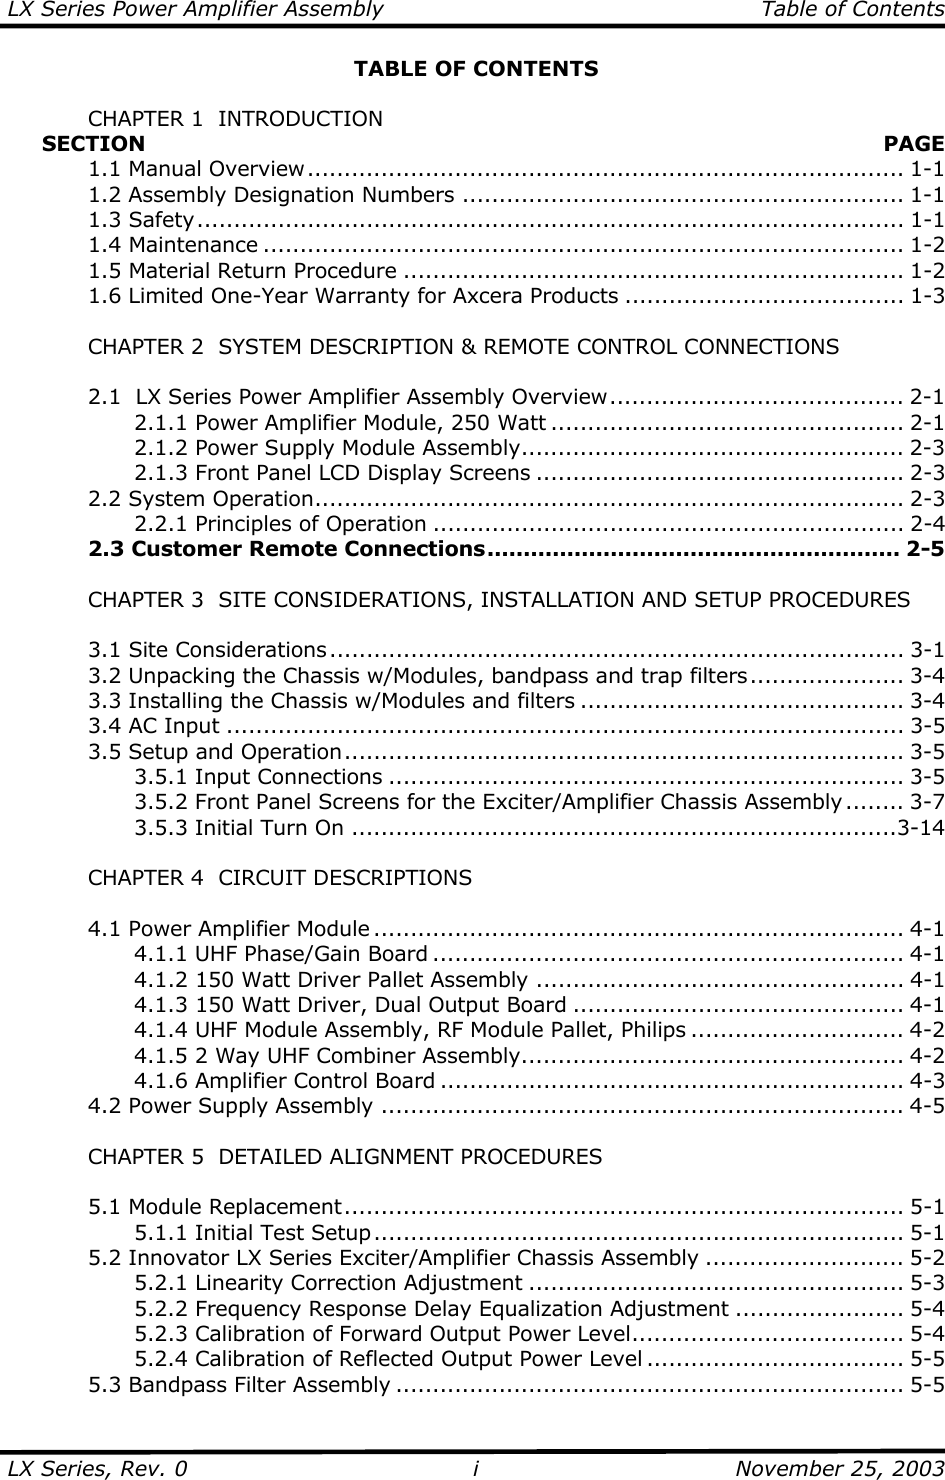 LX Series Power Amplifier Assembly    Table of Contents  LX Series, Rev. 0    November 25, 2003 iTABLE OF CONTENTS    CHAPTER 1  INTRODUCTION      SECTION   PAGE  1.1 Manual Overview................................................................................. 1-1   1.2 Assembly Designation Numbers ............................................................ 1-1  1.3 Safety................................................................................................ 1-1  1.4 Maintenance ....................................................................................... 1-2   1.5 Material Return Procedure .................................................................... 1-2   1.6 Limited One-Year Warranty for Axcera Products ...................................... 1-3    CHAPTER 2  SYSTEM DESCRIPTION &amp; REMOTE CONTROL CONNECTIONS    2.1  LX Series Power Amplifier Assembly Overview........................................ 2-1     2.1.1 Power Amplifier Module, 250 Watt ................................................ 2-1     2.1.2 Power Supply Module Assembly.................................................... 2-3     2.1.3 Front Panel LCD Display Screens .................................................. 2-3  2.2 System Operation................................................................................ 2-3     2.2.1 Principles of Operation ................................................................ 2-4   2.3 Customer Remote Connections......................................................... 2-5      CHAPTER 3  SITE CONSIDERATIONS, INSTALLATION AND SETUP PROCEDURES     3.1 Site Considerations.............................................................................. 3-1   3.2 Unpacking the Chassis w/Modules, bandpass and trap filters..................... 3-4   3.3 Installing the Chassis w/Modules and filters ............................................ 3-4   3.4 AC Input ............................................................................................ 3-5  3.5 Setup and Operation............................................................................ 3-5   3.5.1 Input Connections ...................................................................... 3-5     3.5.2 Front Panel Screens for the Exciter/Amplifier Chassis Assembly ........ 3-7   3.5.3 Initial Turn On ..........................................................................3-14    CHAPTER 4  CIRCUIT DESCRIPTIONS    4.1 Power Amplifier Module ........................................................................ 4-1     4.1.1 UHF Phase/Gain Board ................................................................ 4-1     4.1.2 150 Watt Driver Pallet Assembly .................................................. 4-1     4.1.3 150 Watt Driver, Dual Output Board ............................................. 4-1     4.1.4 UHF Module Assembly, RF Module Pallet, Philips ............................. 4-2     4.1.5 2 Way UHF Combiner Assembly.................................................... 4-2     4.1.6 Amplifier Control Board ............................................................... 4-3   4.2 Power Supply Assembly ....................................................................... 4-5    CHAPTER 5  DETAILED ALIGNMENT PROCEDURES   5.1 Module Replacement............................................................................ 5-1   5.1.1 Initial Test Setup........................................................................ 5-1   5.2 Innovator LX Series Exciter/Amplifier Chassis Assembly ........................... 5-2     5.2.1 Linearity Correction Adjustment ................................................... 5-3     5.2.2 Frequency Response Delay Equalization Adjustment ....................... 5-4     5.2.3 Calibration of Forward Output Power Level..................................... 5-4     5.2.4 Calibration of Reflected Output Power Level ................................... 5-5   5.3 Bandpass Filter Assembly ..................................................................... 5-5 